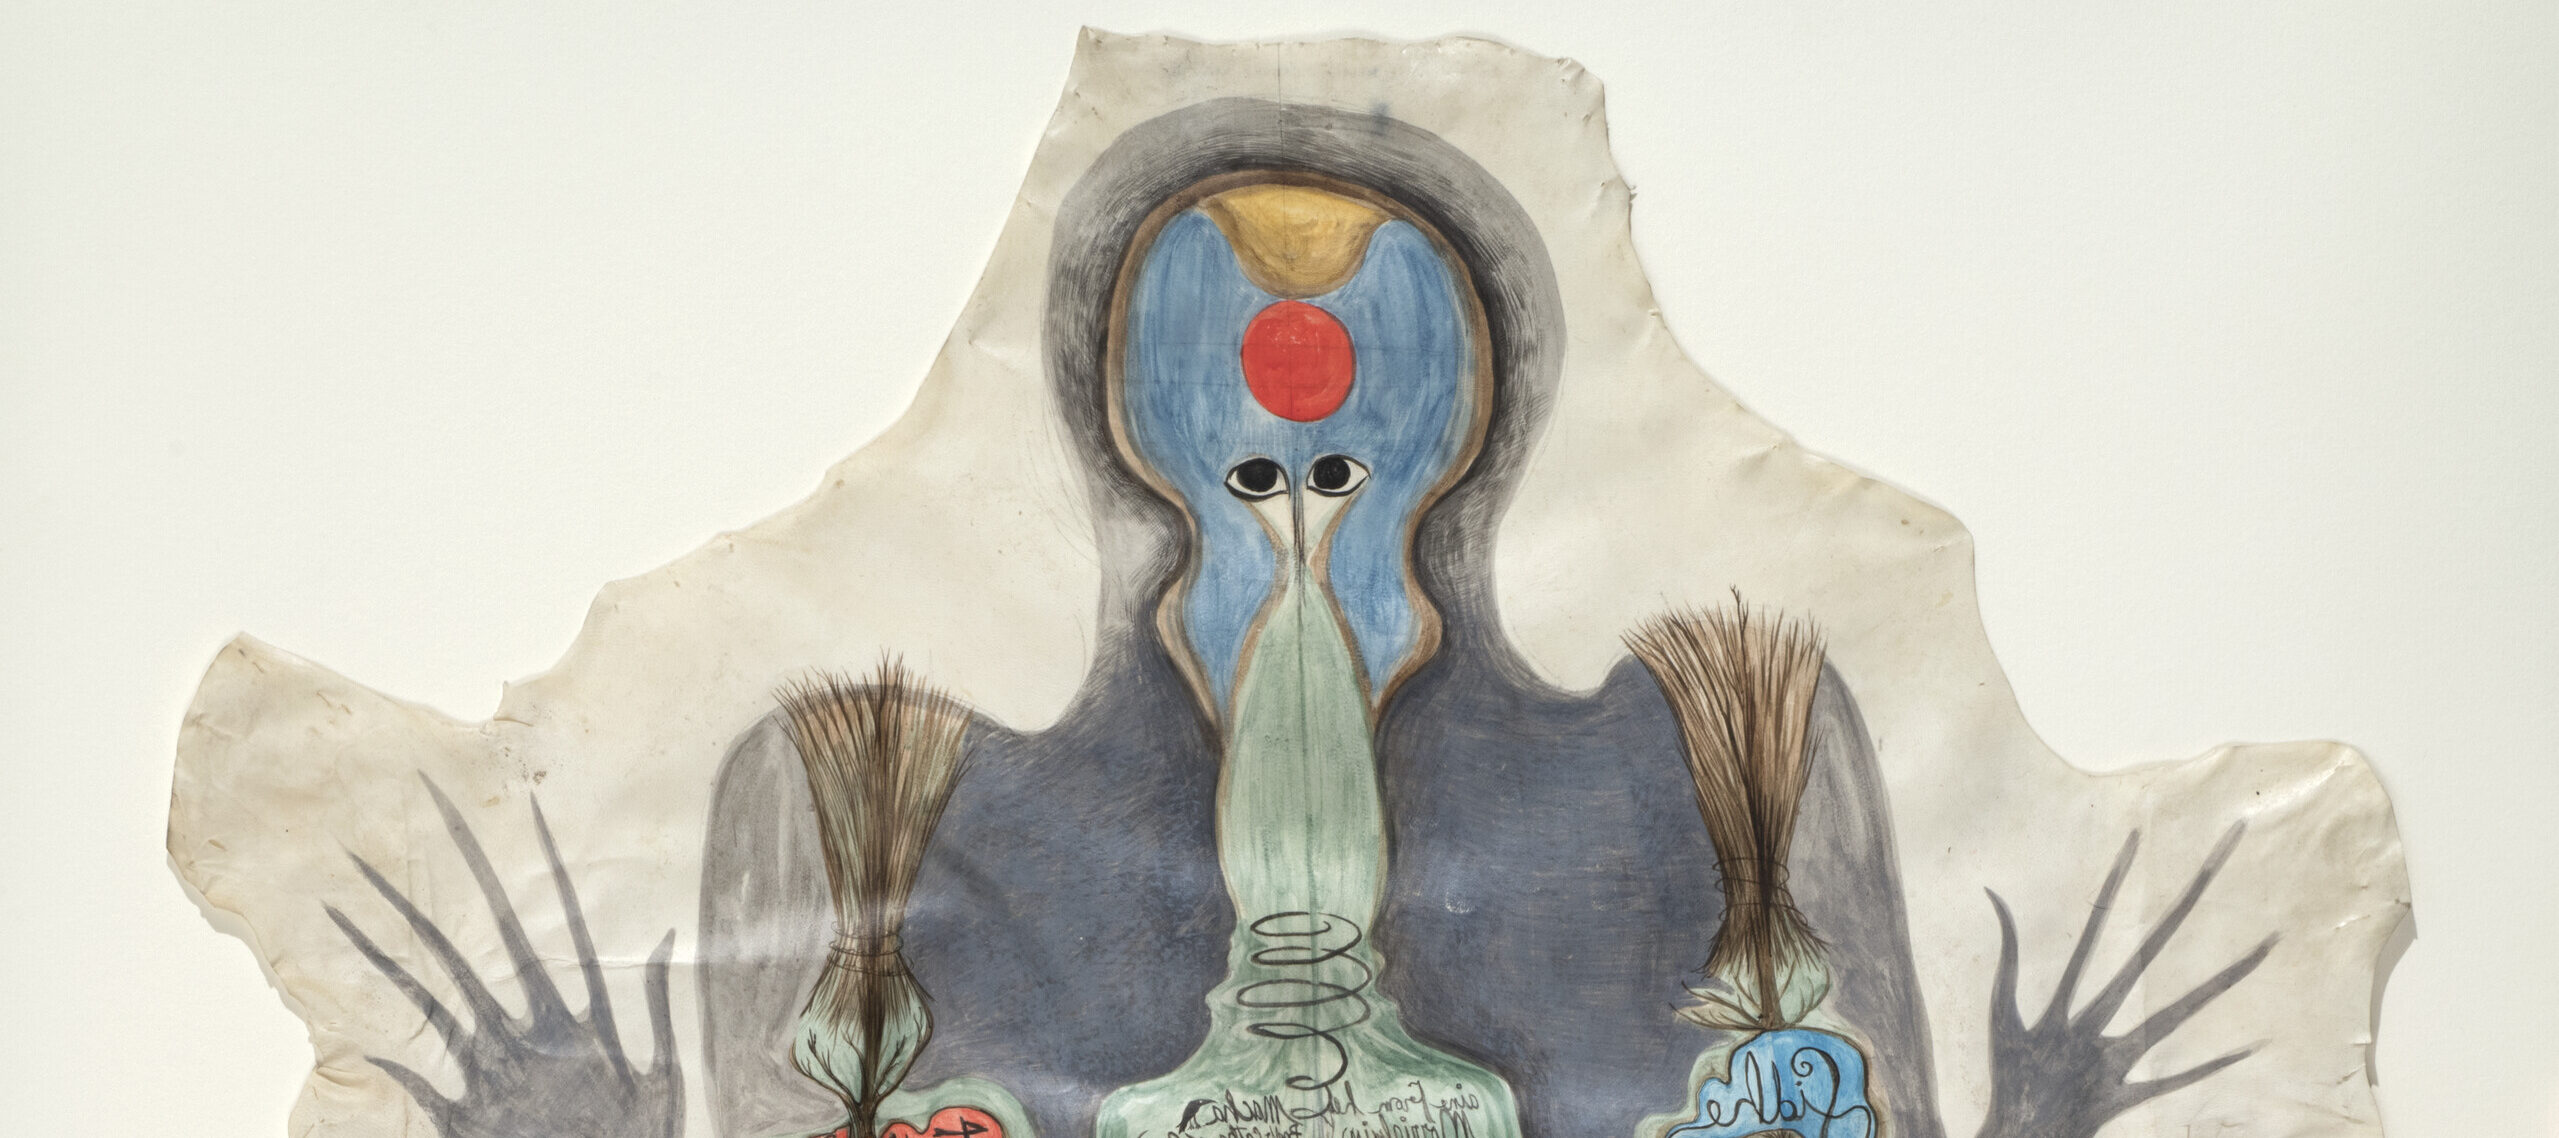 Surrealist painting shaped like an animal skin dominated by a foreboding human-like shape hovering over narrative scenes of animals, human hybrids, and reverse-handwritten Celtic references. At the center, a bright blue circle containing a chimeric figure sits atop a seated camel.